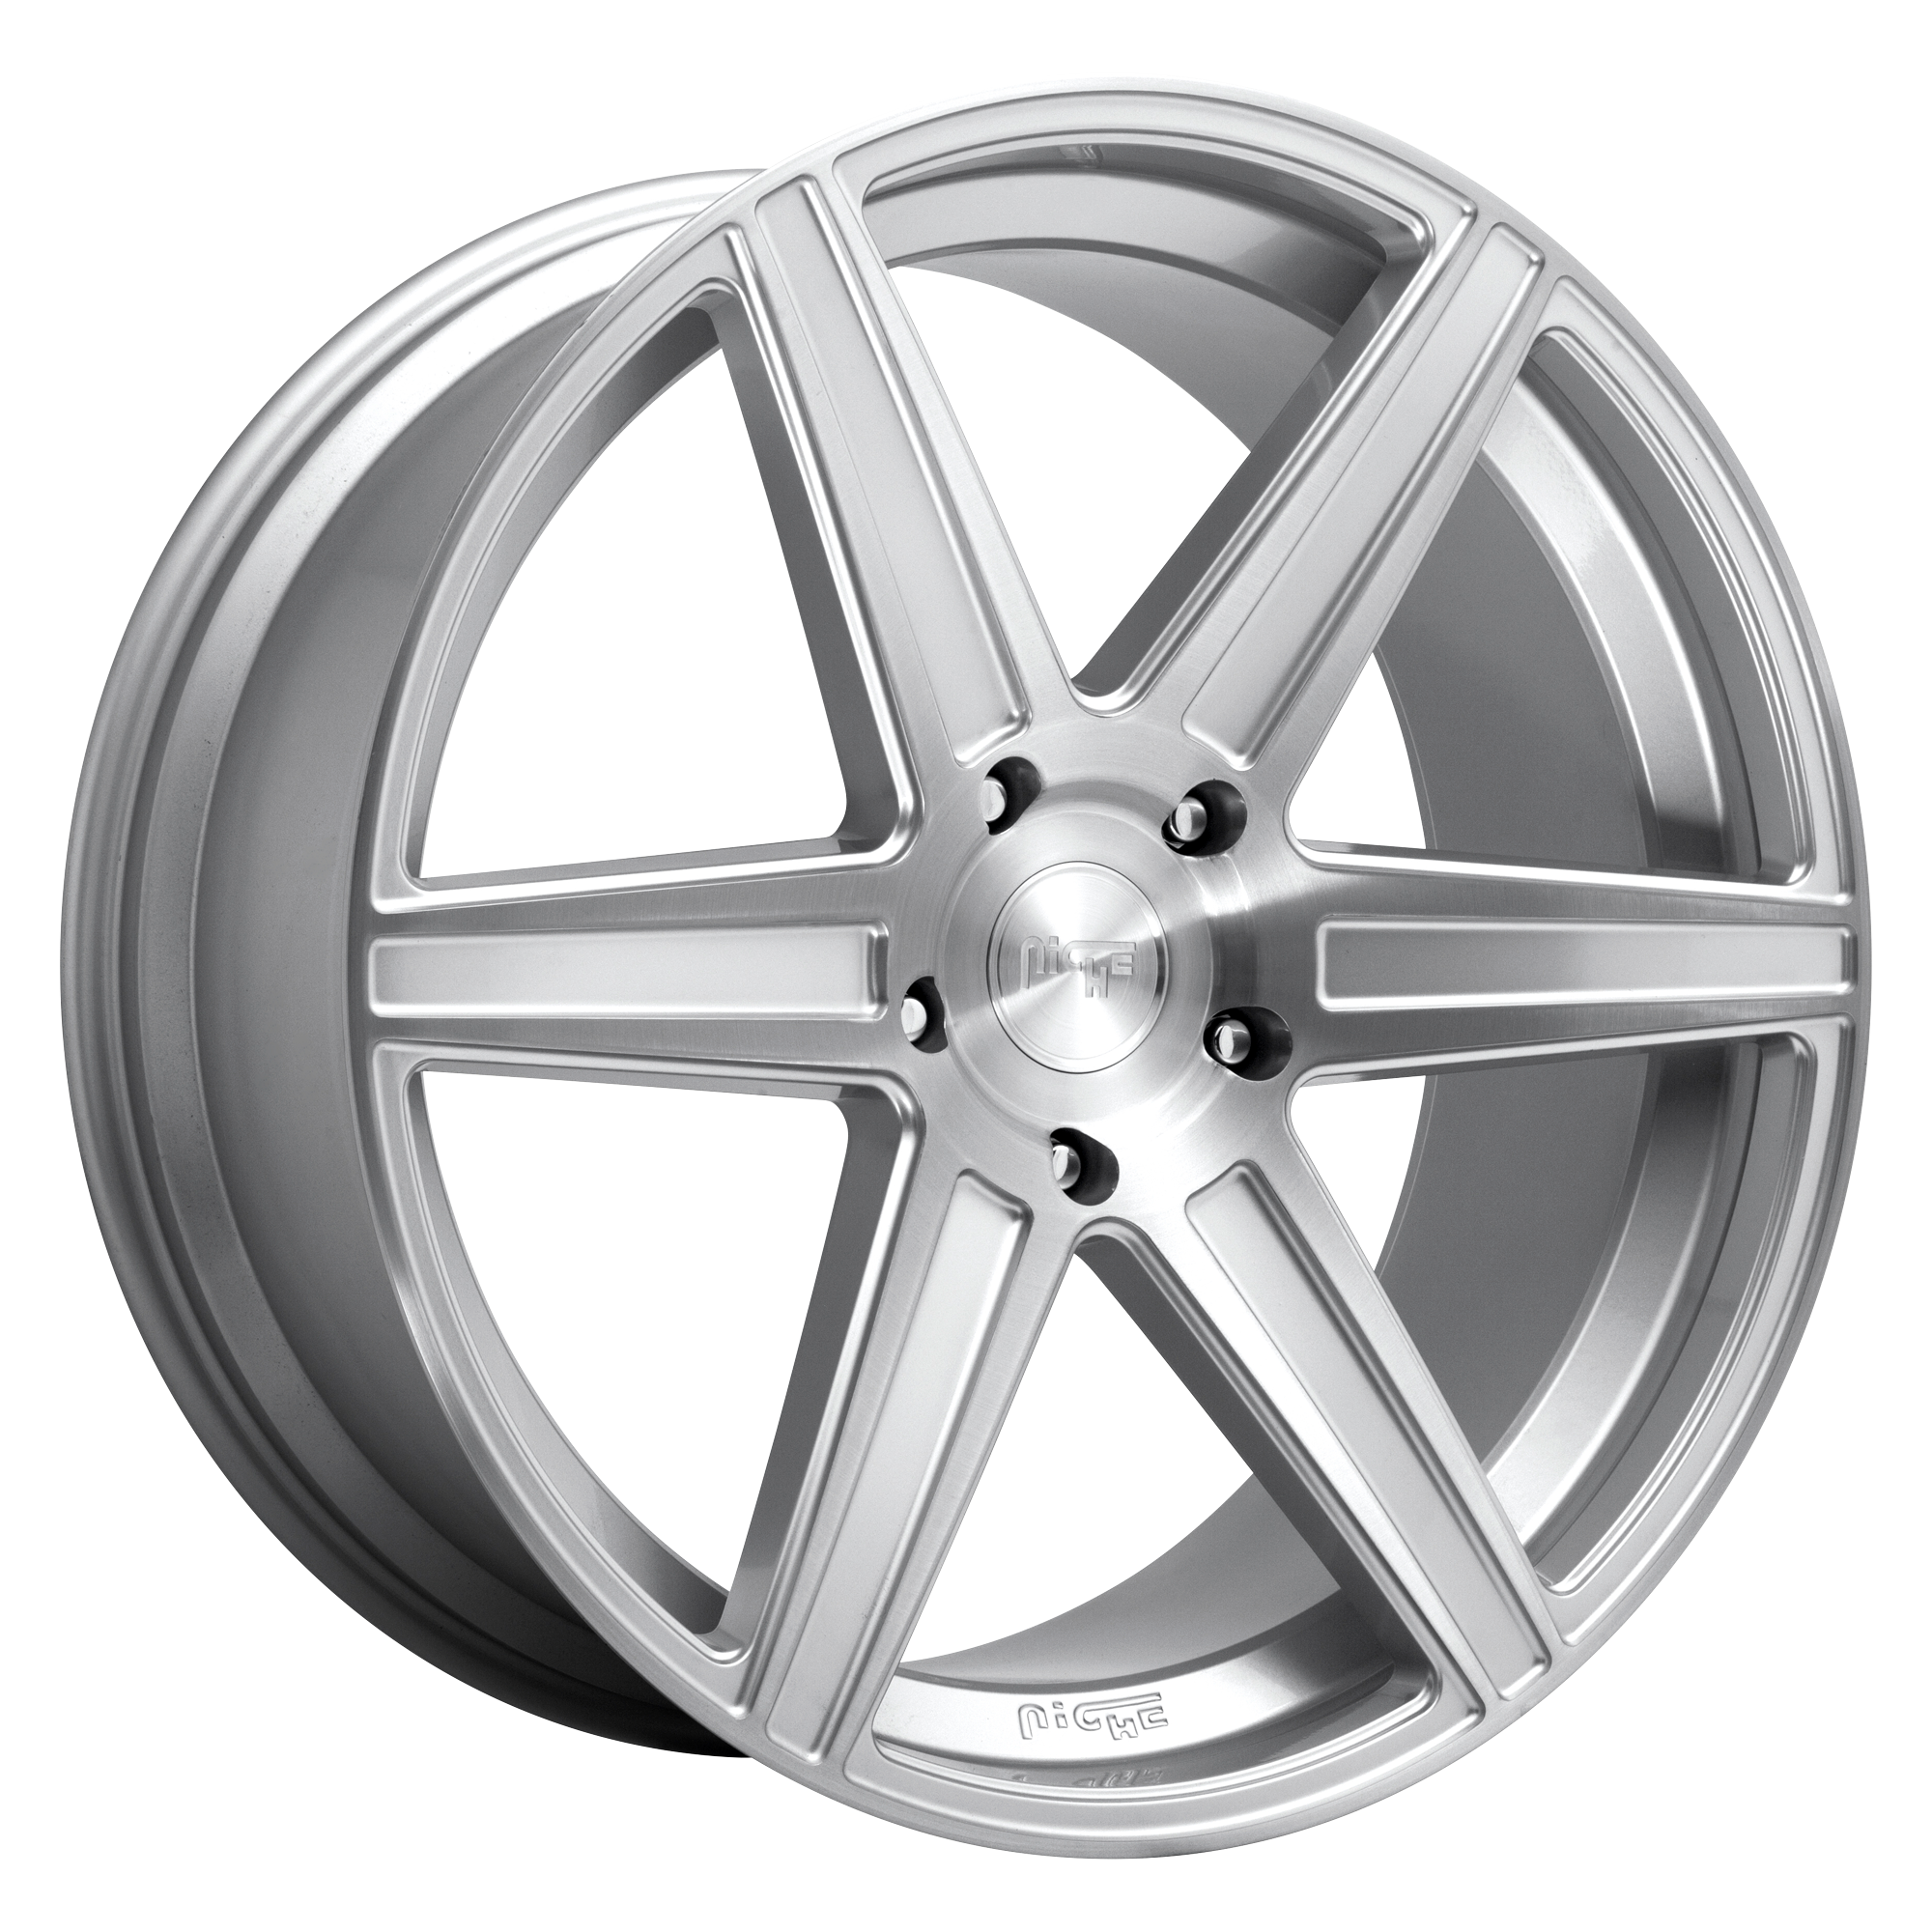 CARINA 22x9.5 5x150.00 GLOSS SILVER BRUSHED (30 mm) - Tires and Engine Performance